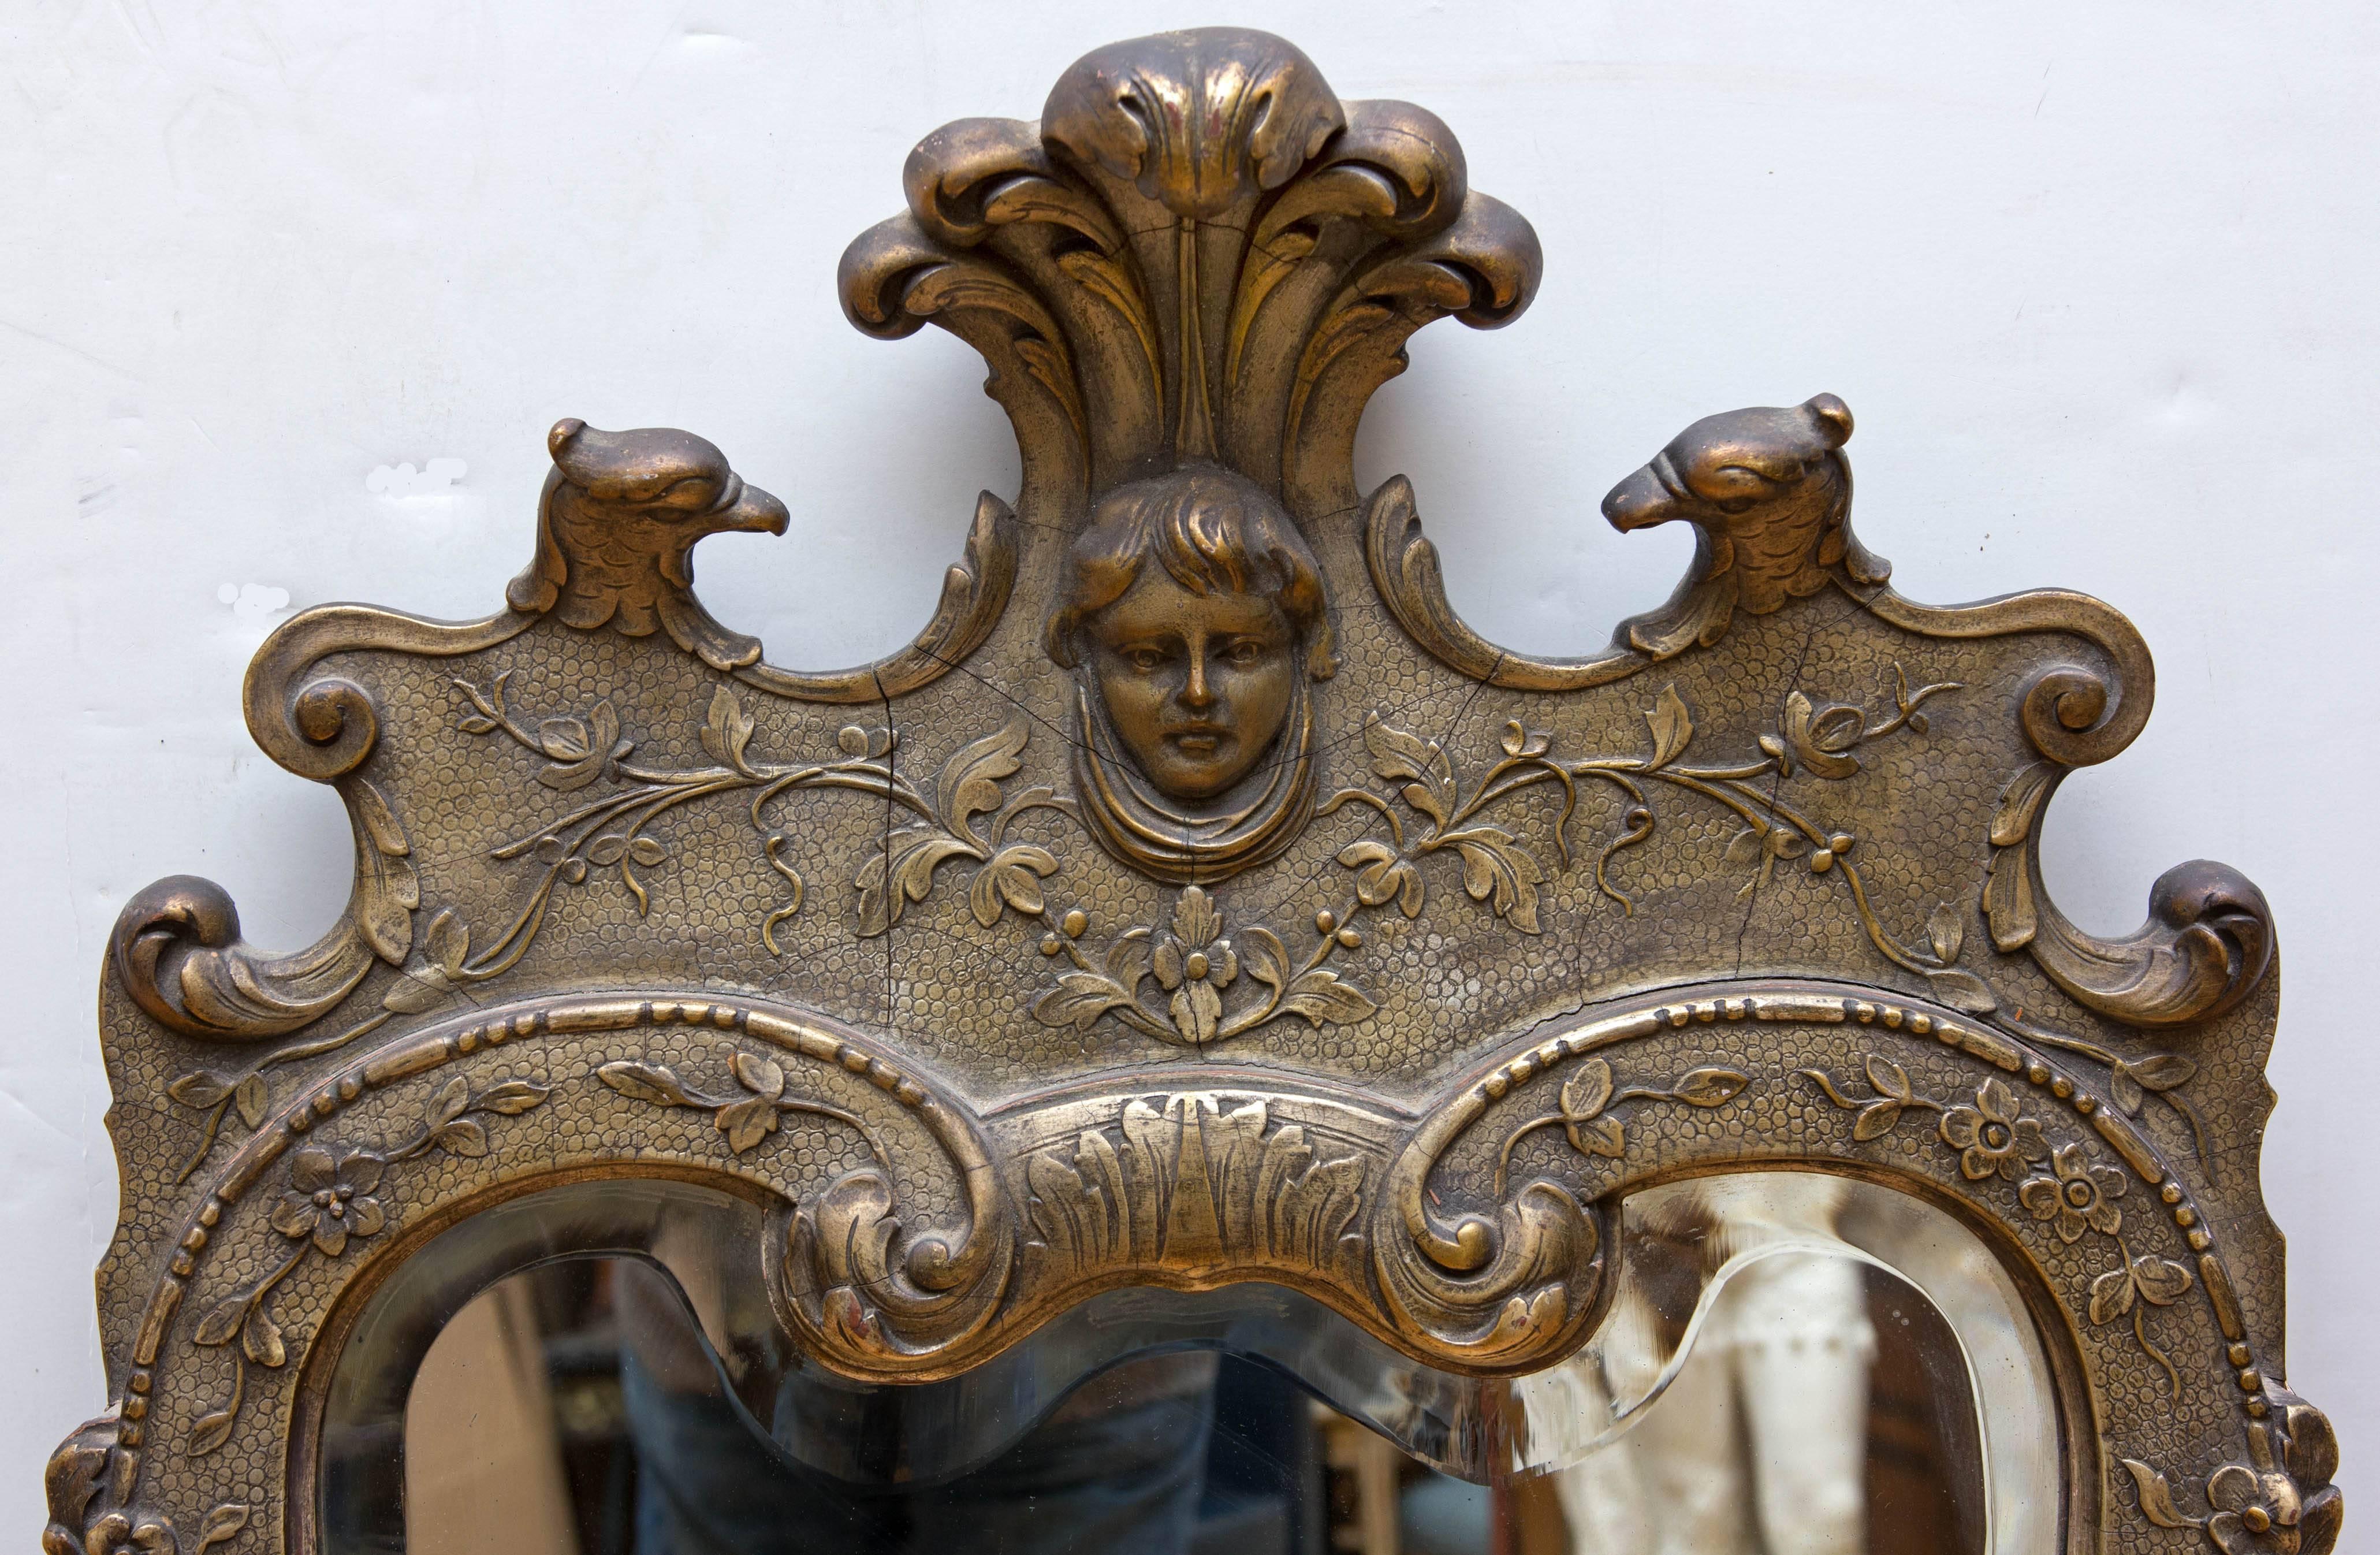 Antique George II revival silver gilt console mirror. Carved wood and gesso decoration. Mirror is beveled and original. Circa 1900.